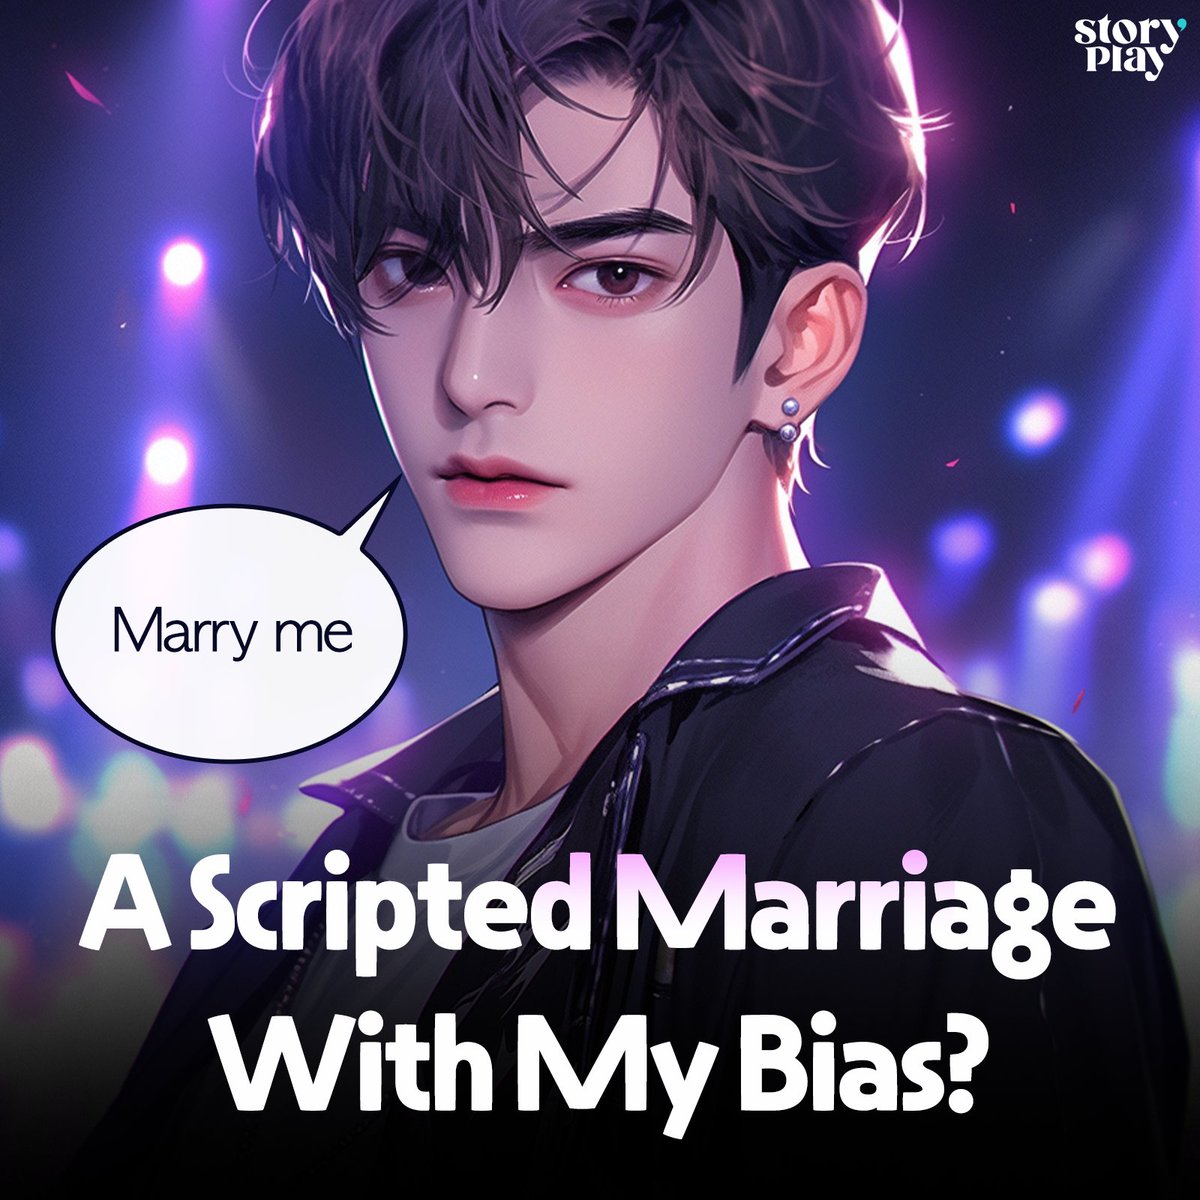 Marrying my bias from my fav idol tho it's scripted. But this can be true? 
➡️storyplay.com/en/story/14500
❣️
#WhatIsGoingOn #QueenofTears #OriginalSeries #Netflix #HyunjinxCartier #Idol #Celebrity #KoreanUpdate #POV #booktwt #BTS #STRAYKIDS #RIIZE #RIIZE_Impossible #Kdrama #kpoptwt